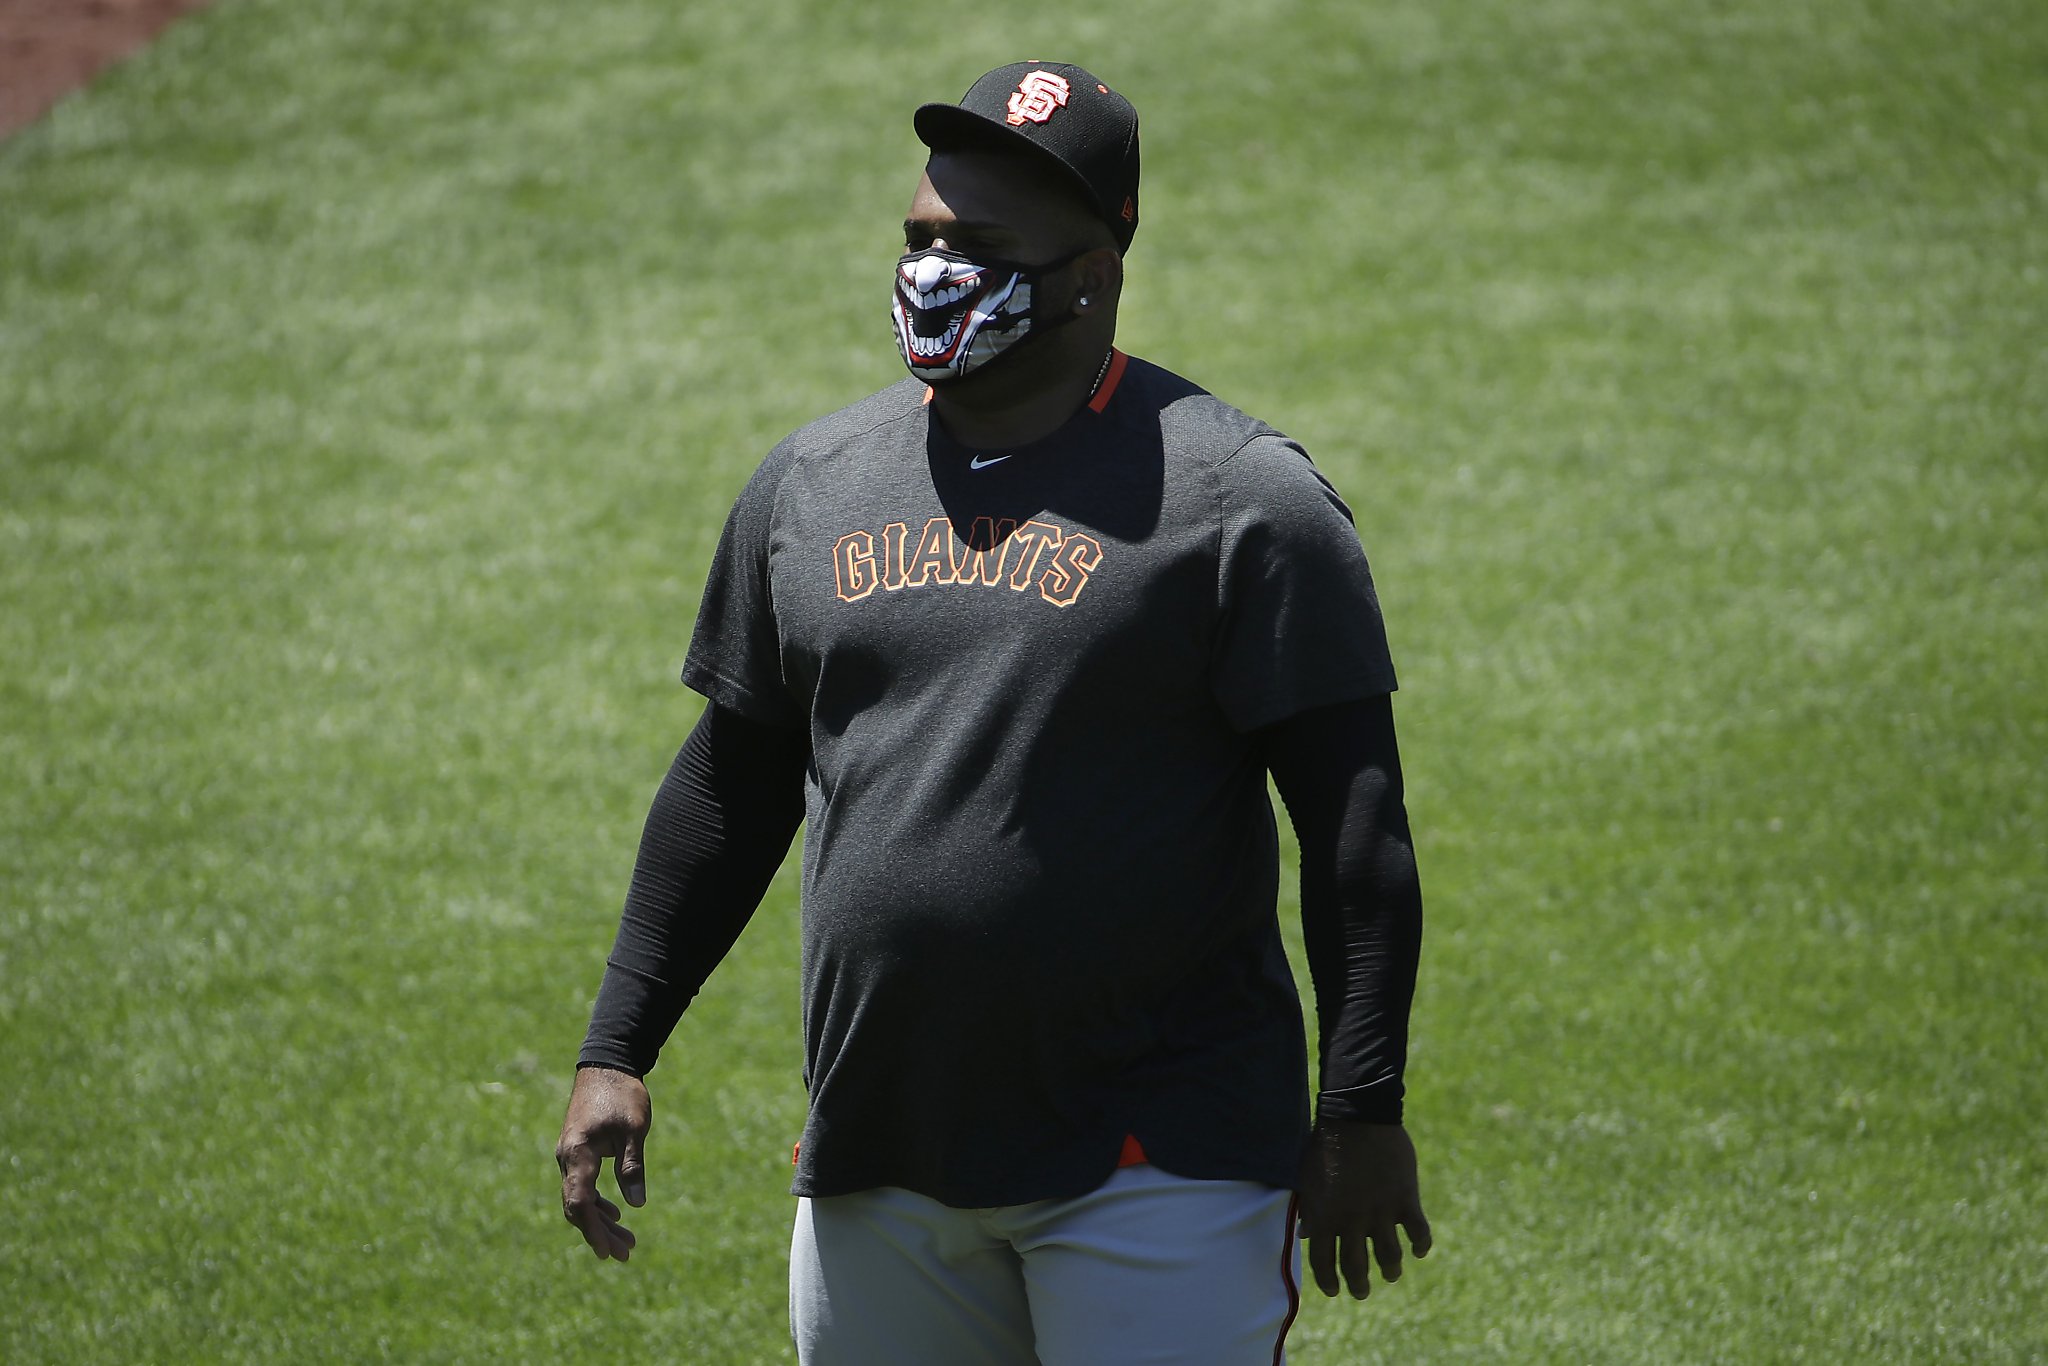 Giants' manager defers questions on Pablo Sandoval's weight, says